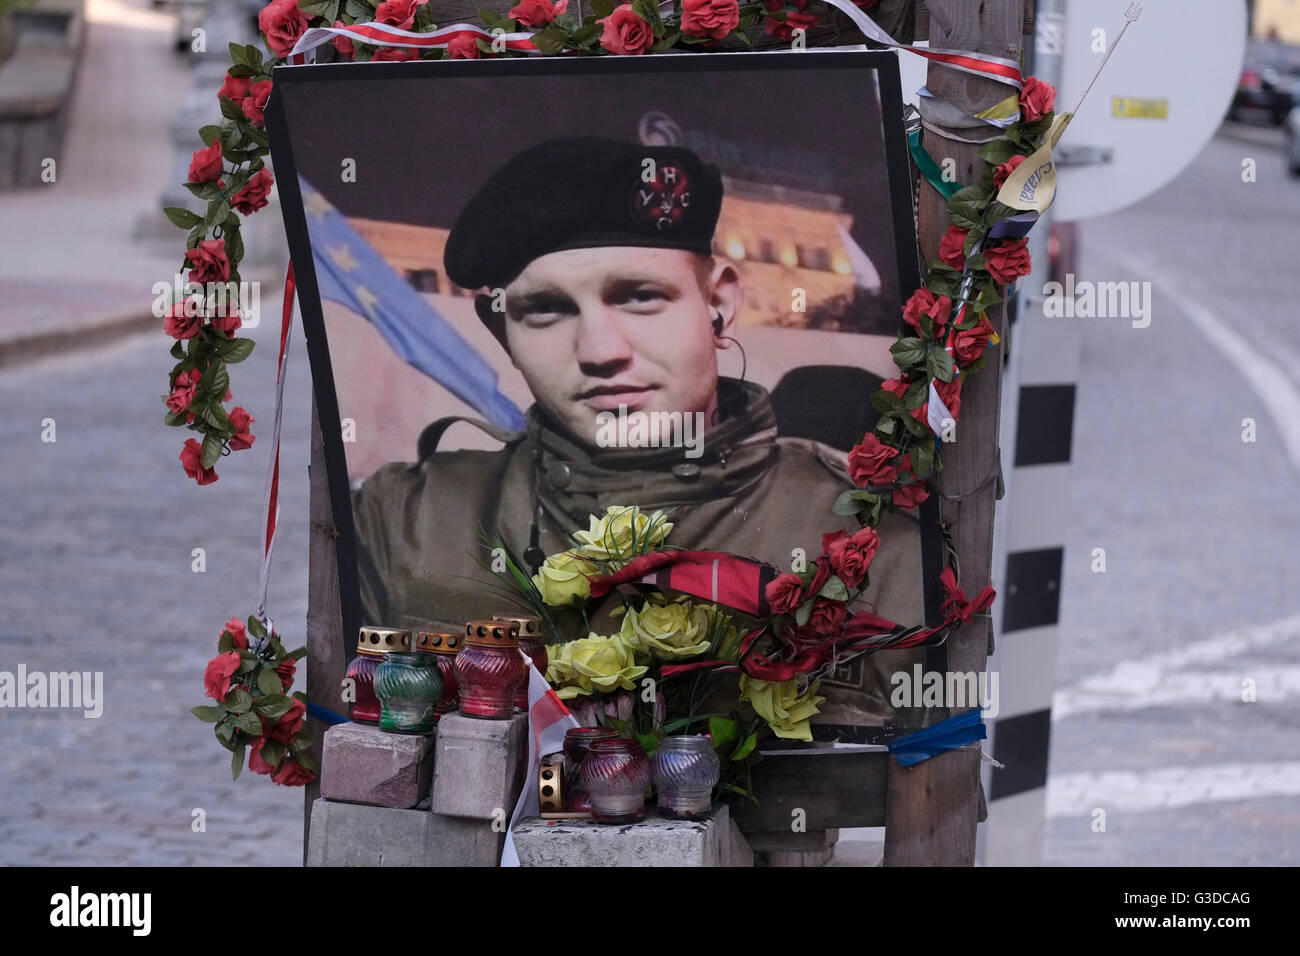 Memorial for an Ukrainian soldier killed in clashes with pro Russian militia in Eastern Ukraine in Mykhailo Hrushevsky Street in the center of Kiev capital of Ukraine Stock Photo